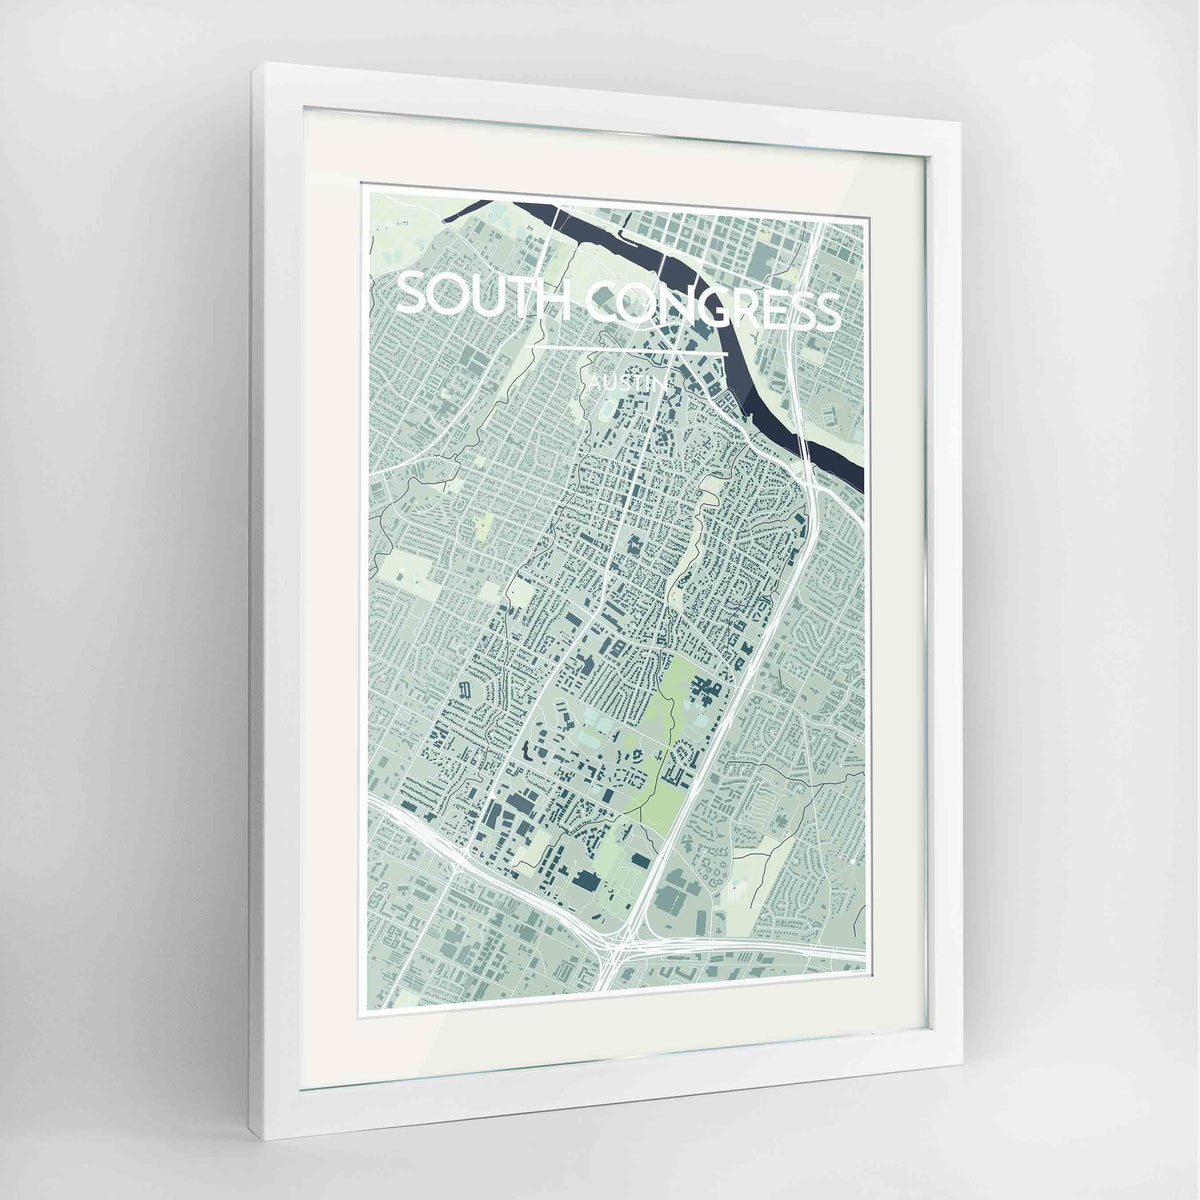 Framed South Congress Neighbourhood of Austin Map Art Print 24x36&quot; Contemporary White frame Point Two Design Group